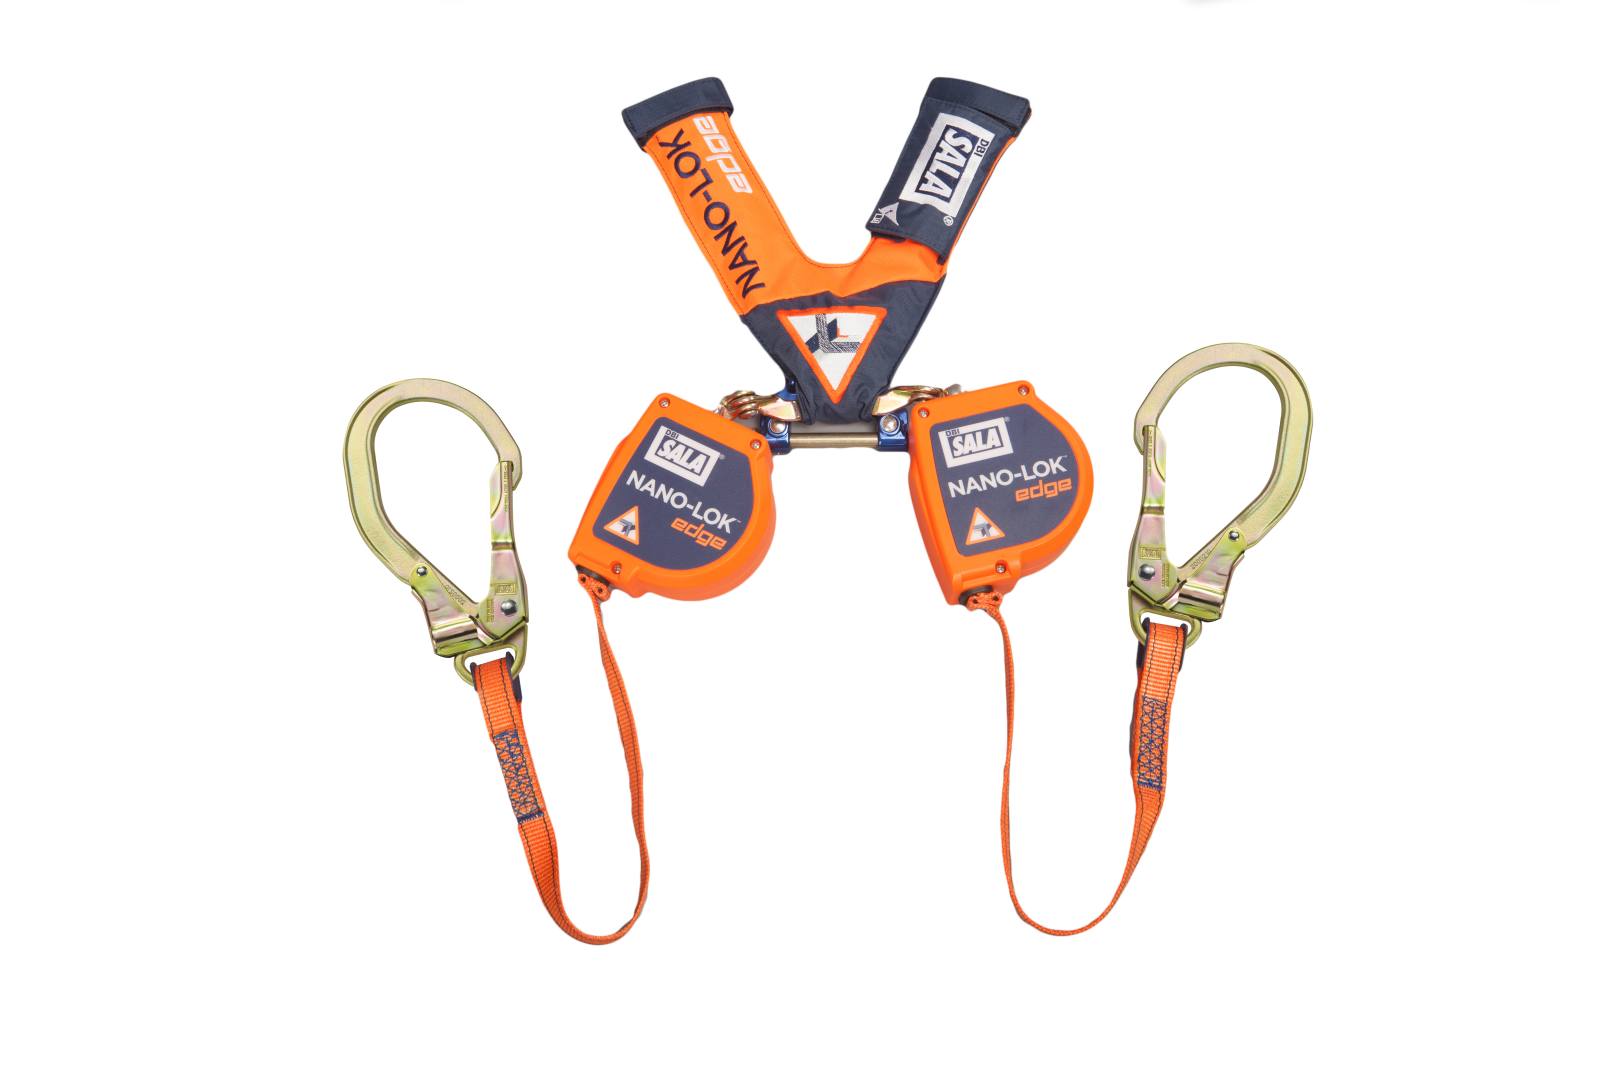 3M DBI-SALA Nano-Lok Edge twin fall arrester, edge-tested, length: 2.5 m, Dyneema webbing 20 mm, Trilock webbing carabiner, 2 steel scaffold carabiners opening width 63 mm, 3M Connected Safety-ready RFID tag for inspection, 2.5 m